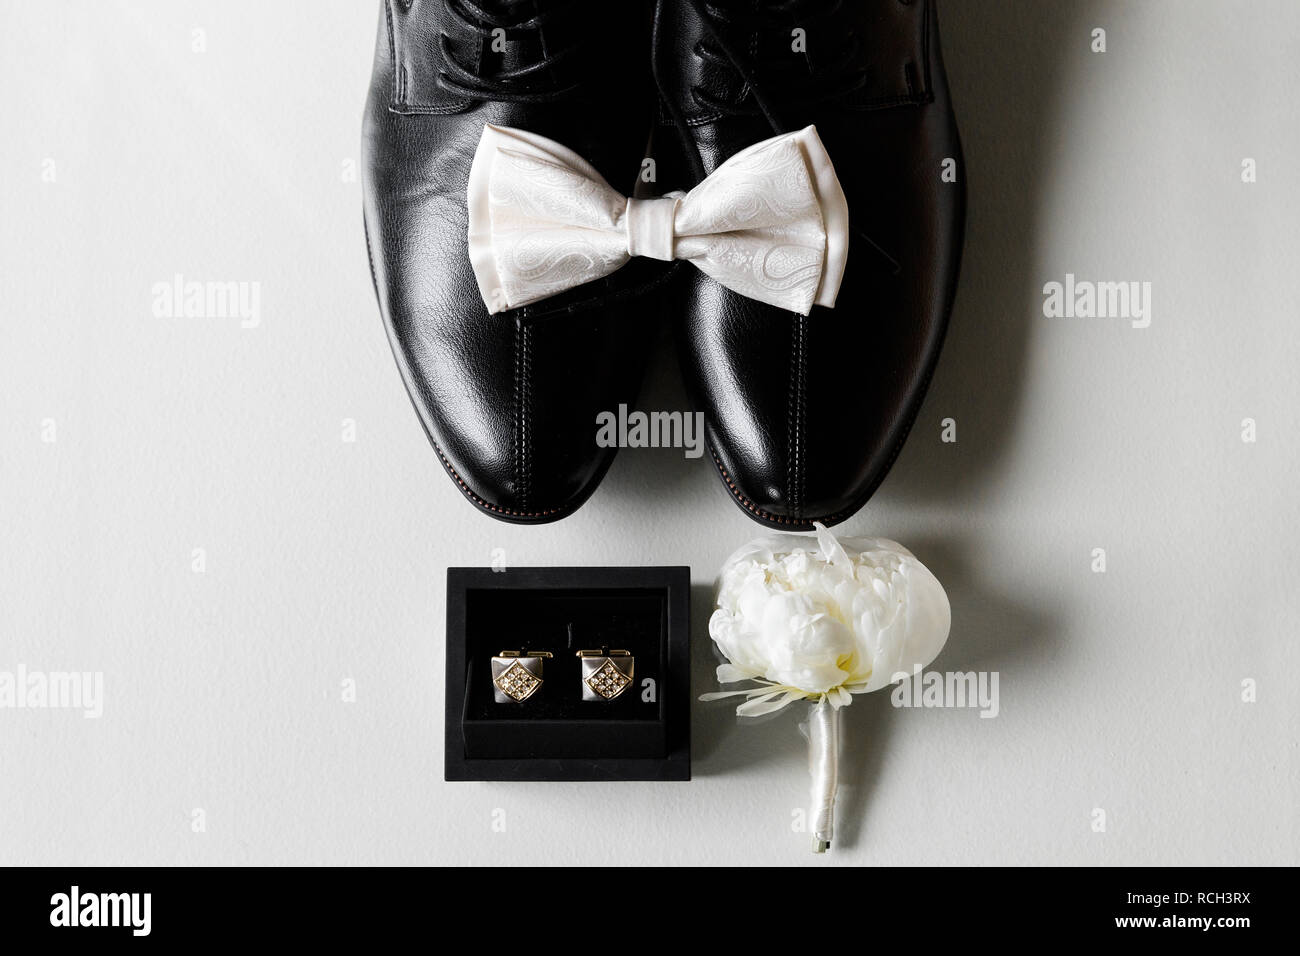 Photo of a white bow tie on black shoes, next to a box with cufflinks and boutonniere. Close-up on a white background. Stock Photo